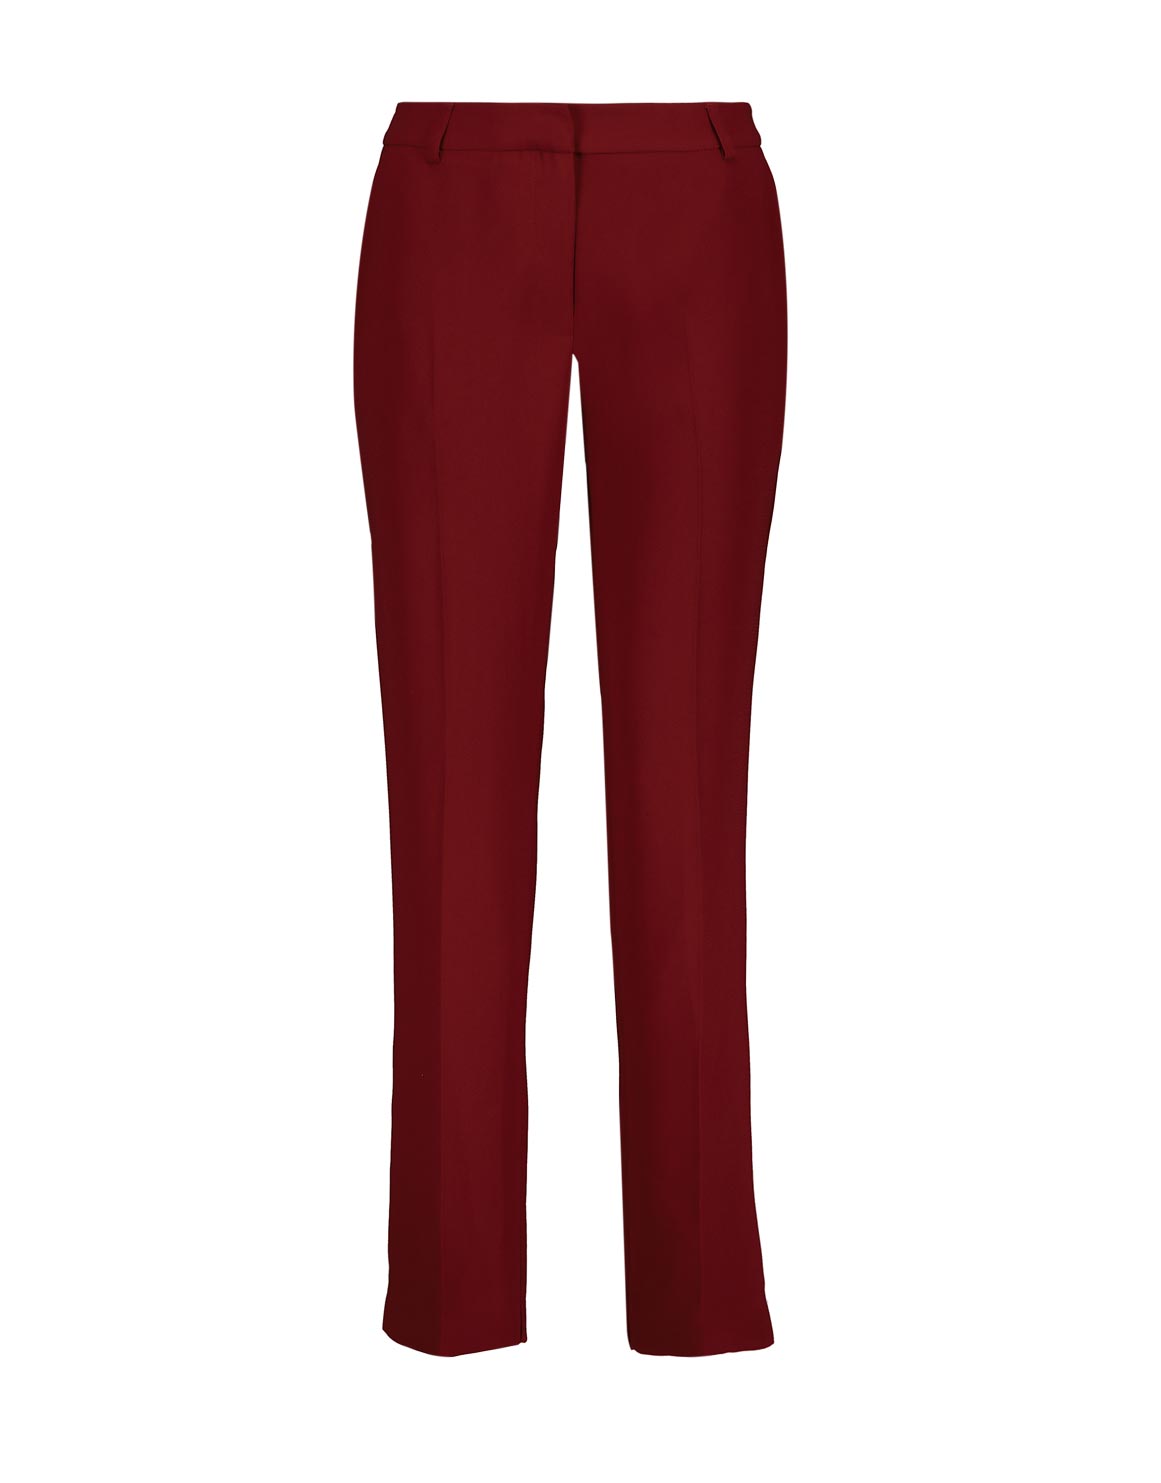 W 20 SUIT PANT - Woolworths Mauritius Online